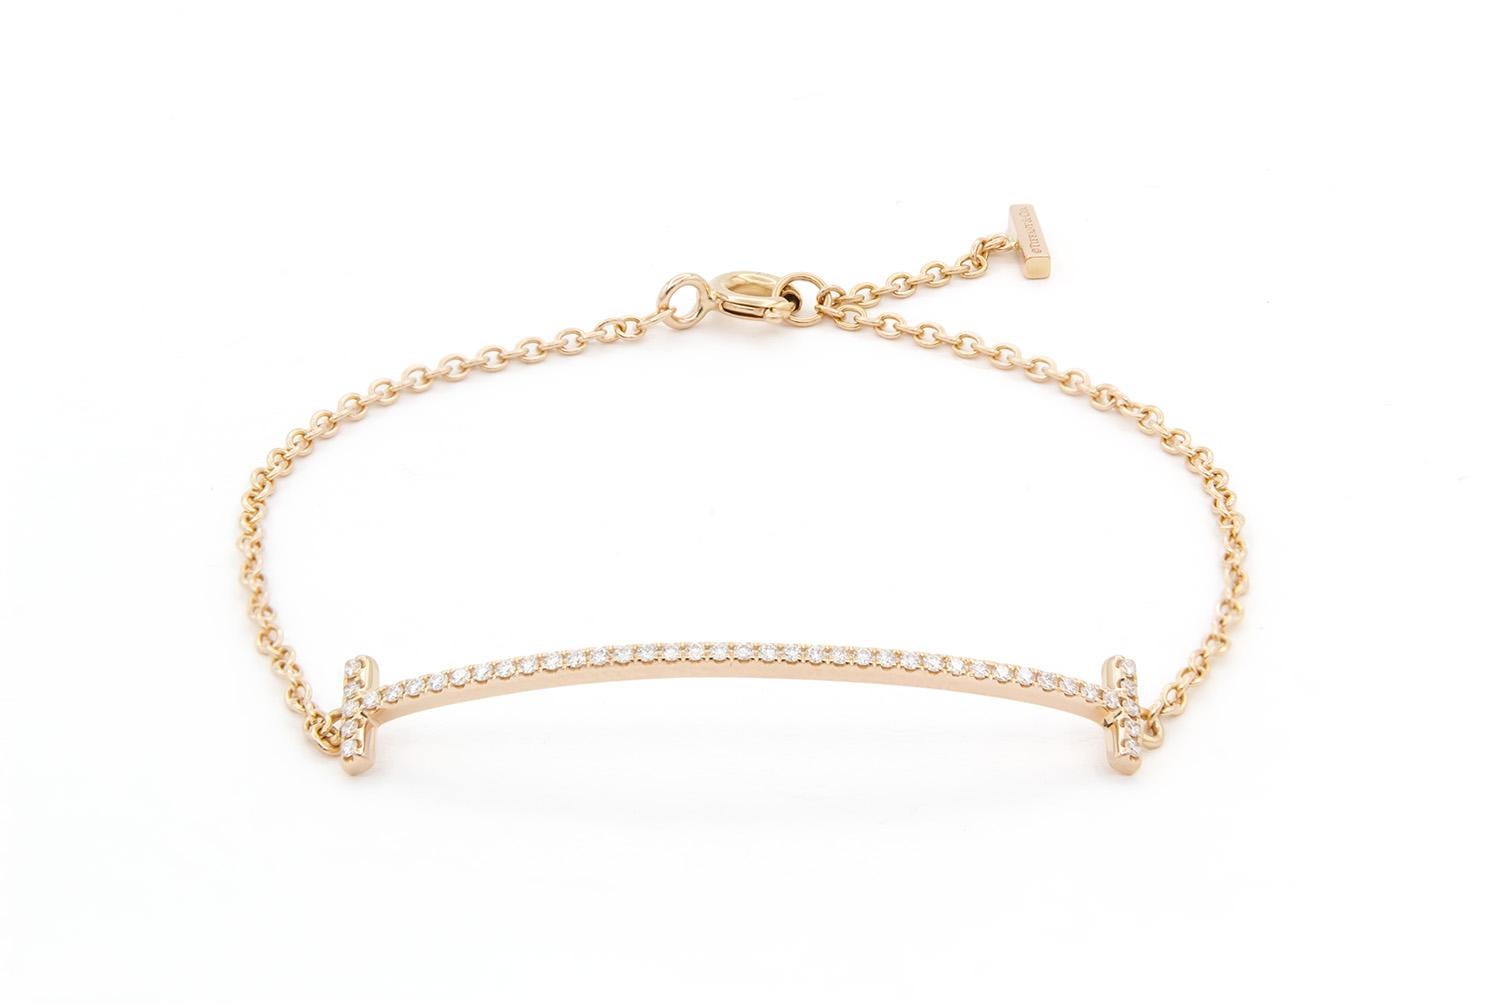 We are pleased to offer this Tiffany & Co Tiffany T Smile Bracelet. In classic Tiffany style this bracelet is finely crafted from 18k rose gold & diamonds. Streamlined and modern, this bracelet shines with sophistication and bold simplicity. Strong